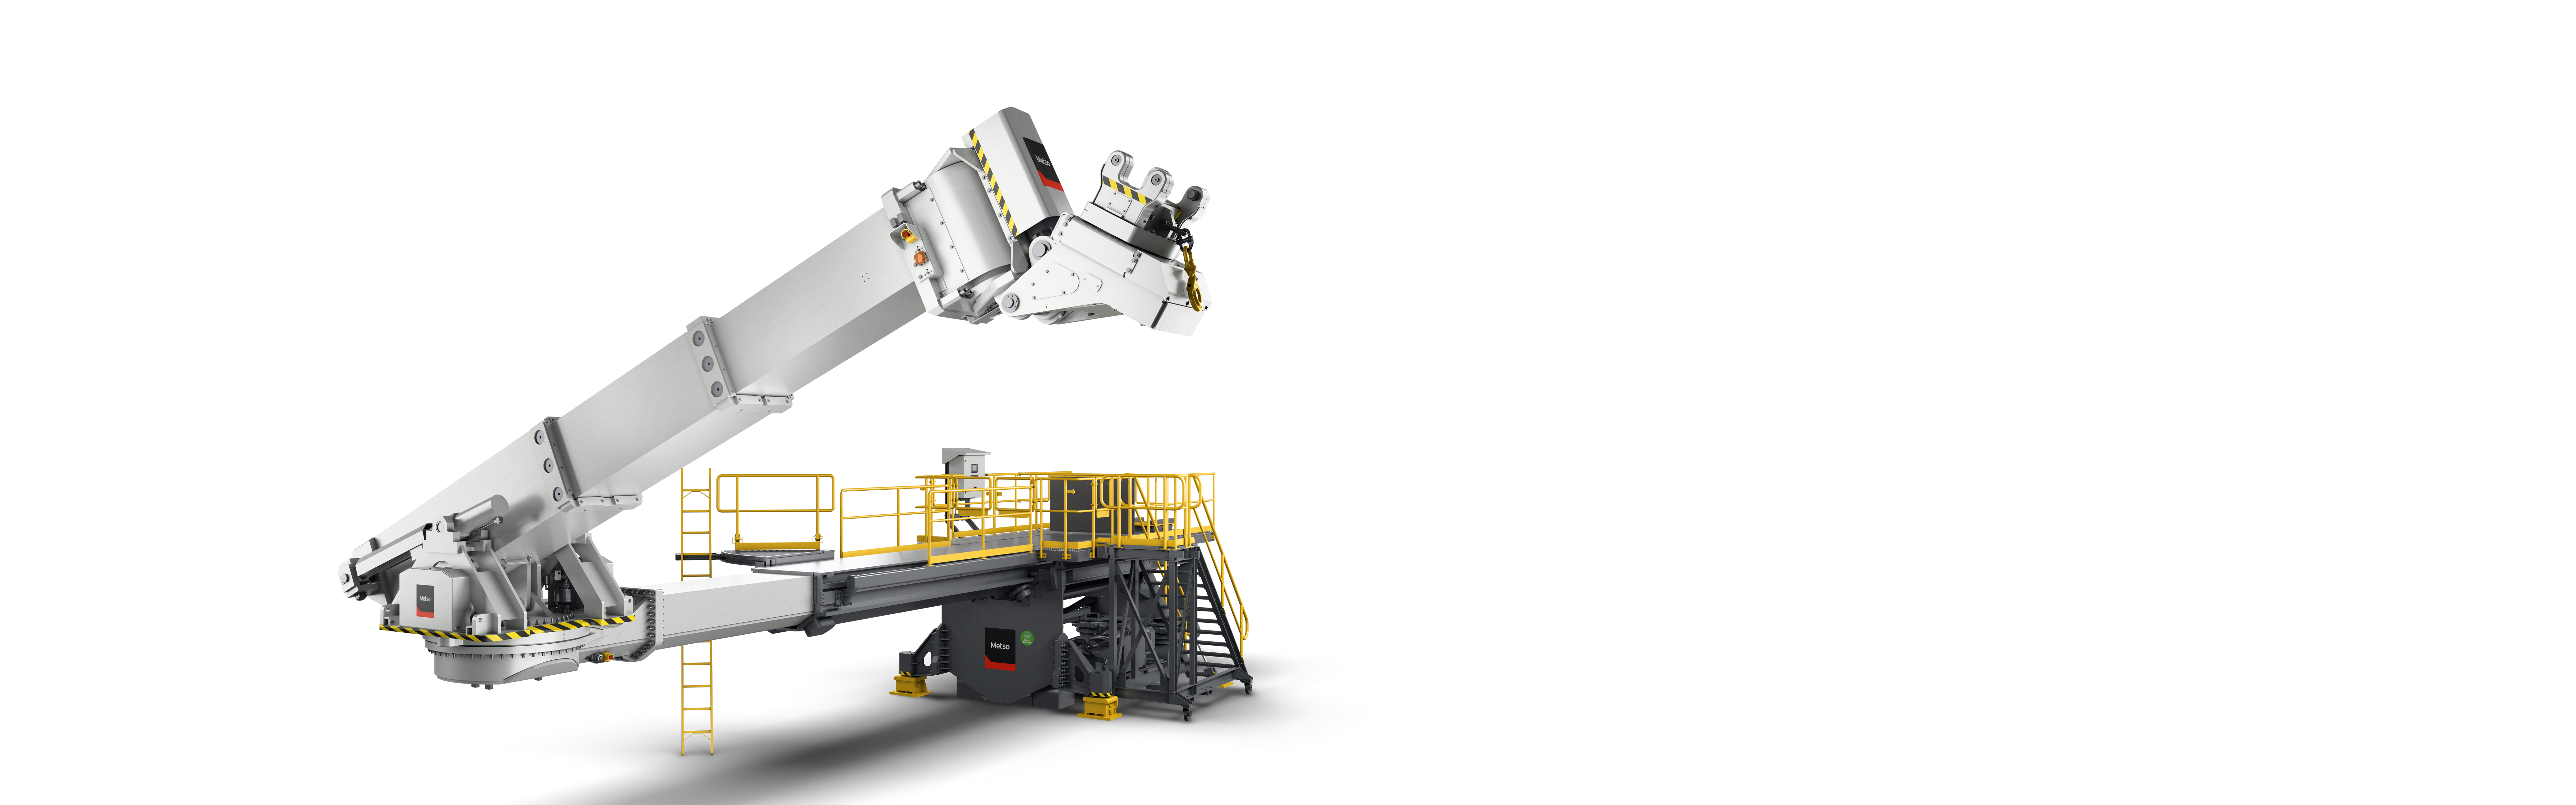 metso-mill-reline-machines-safety-downtime